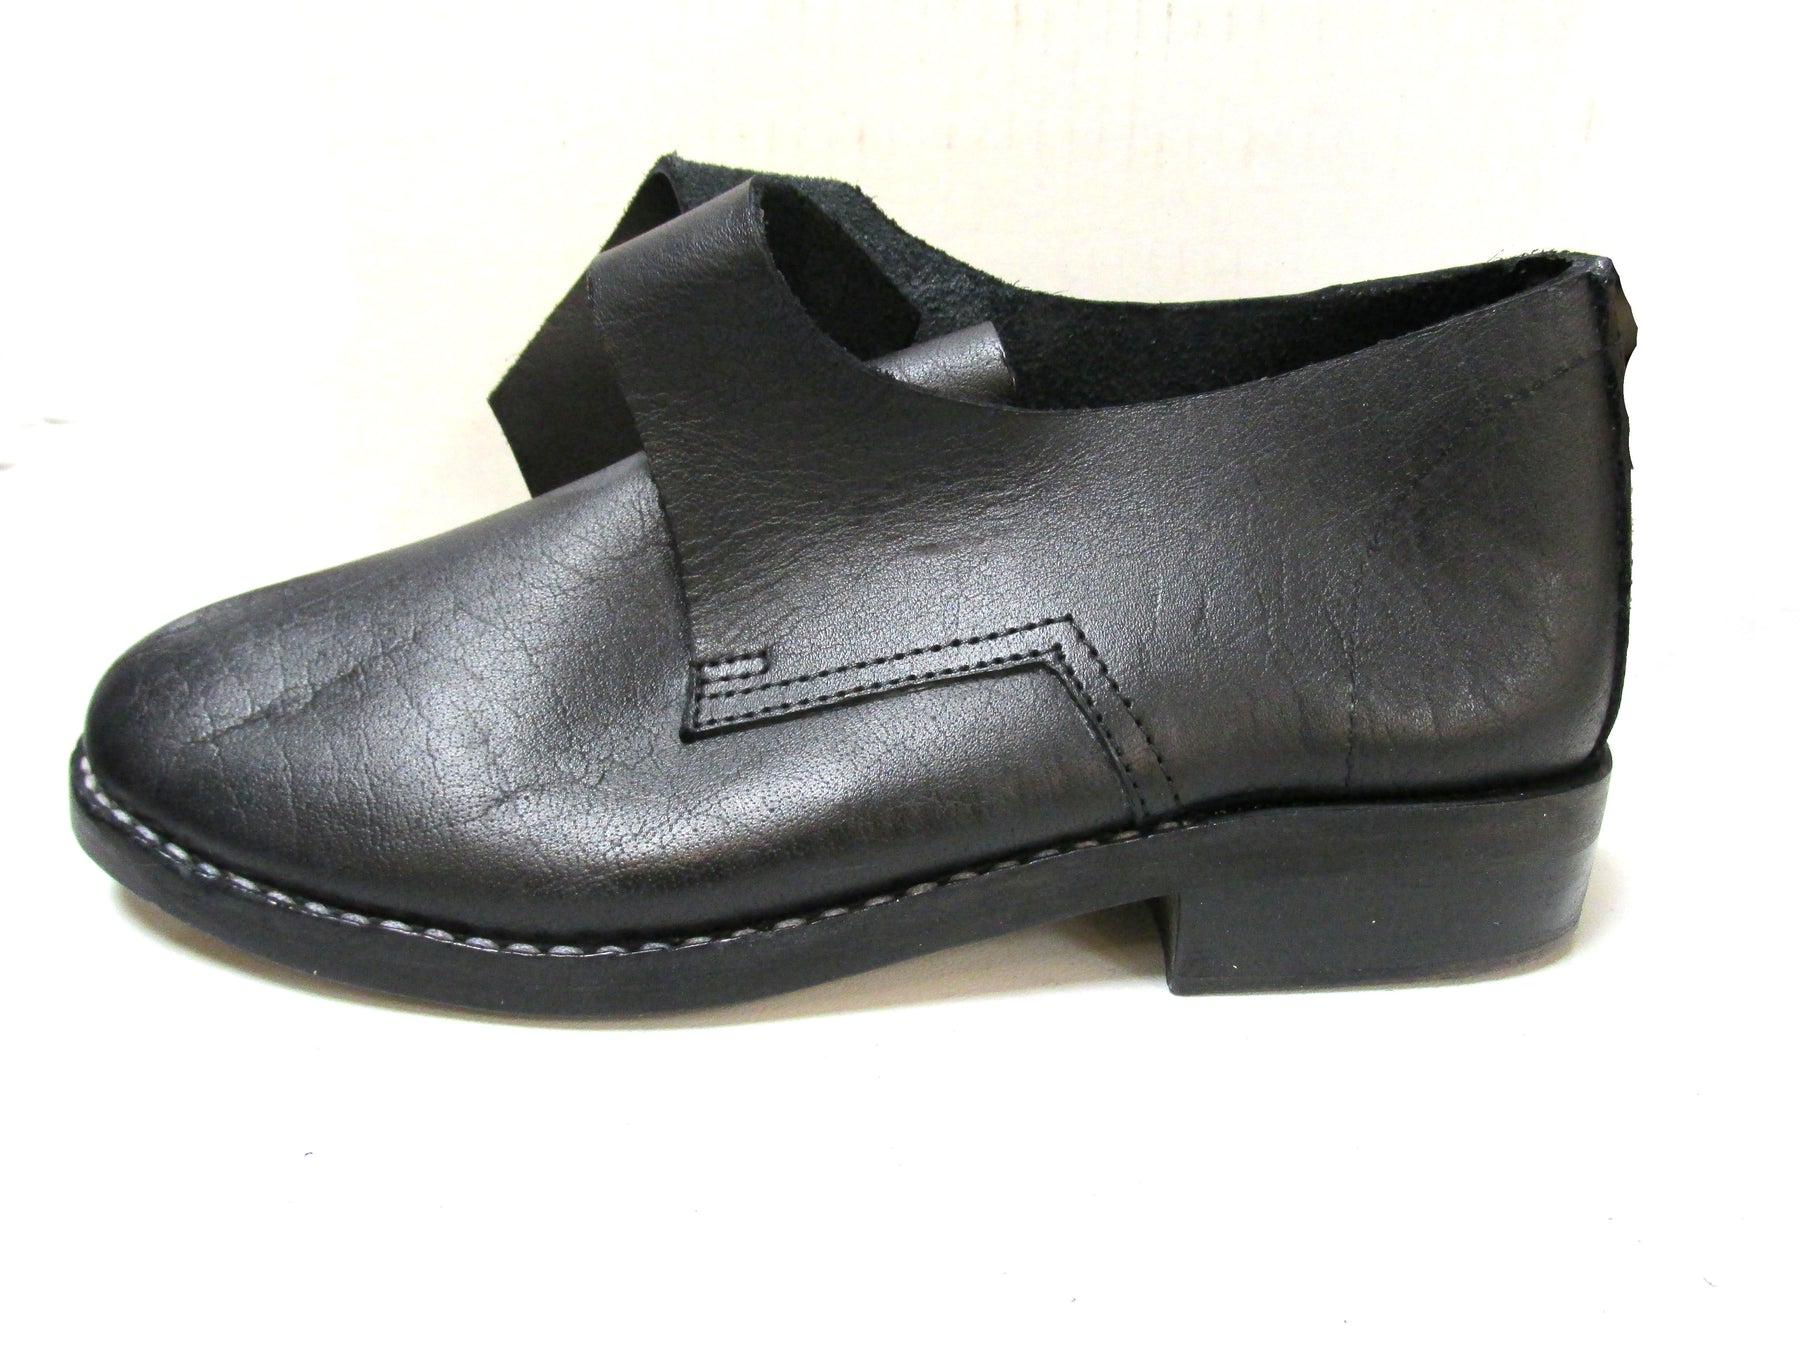 Reproduction Leather Colonial Shoes with Buckles